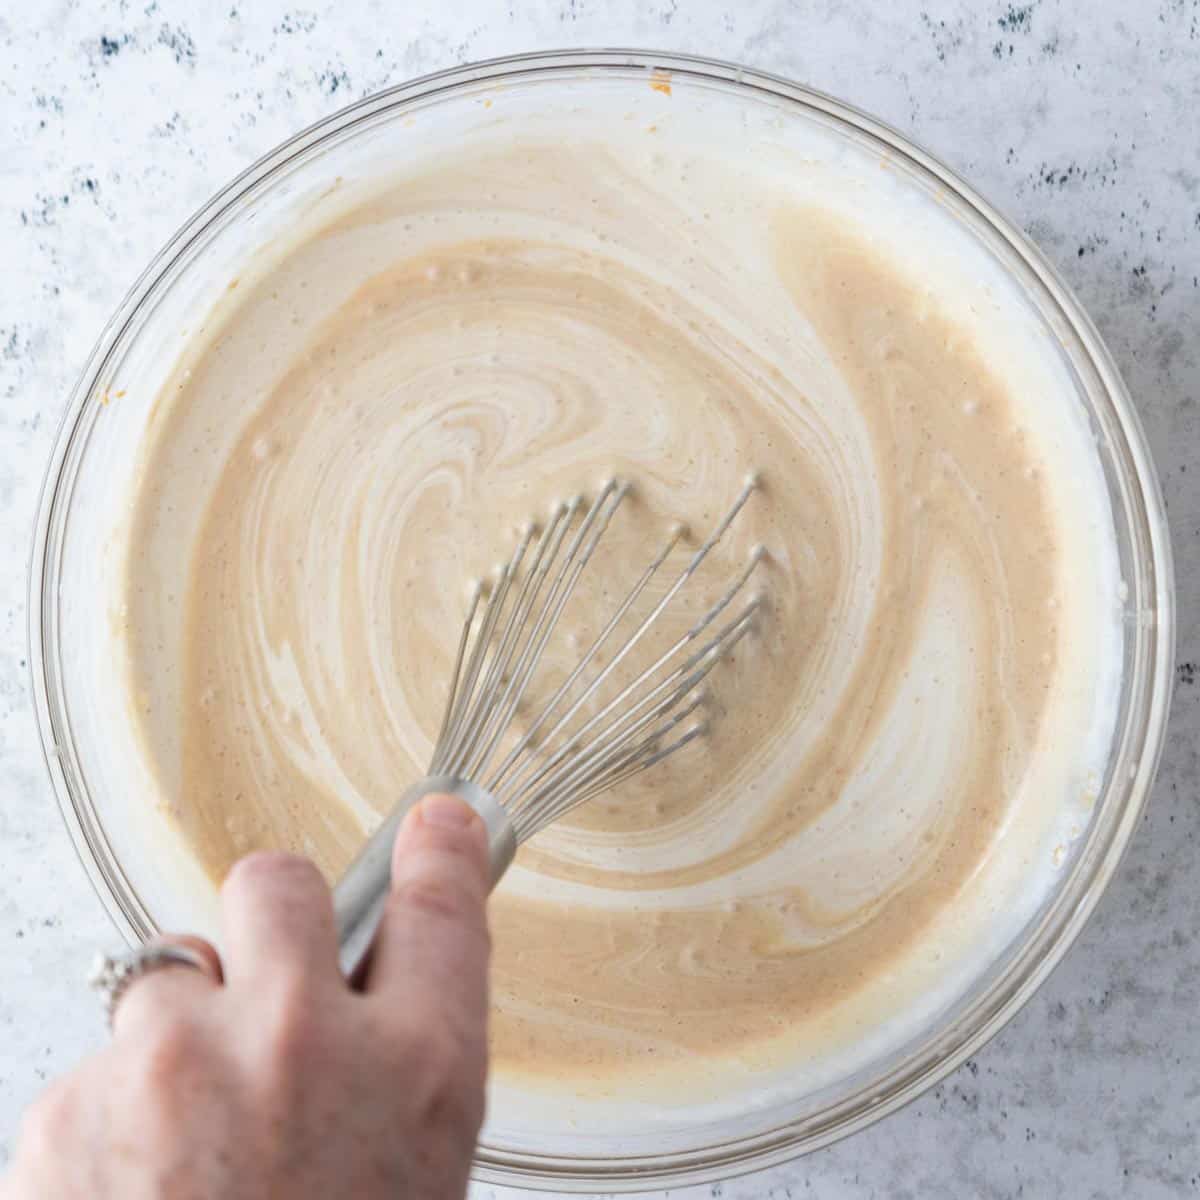 whisk mixing ingredients in a bowl